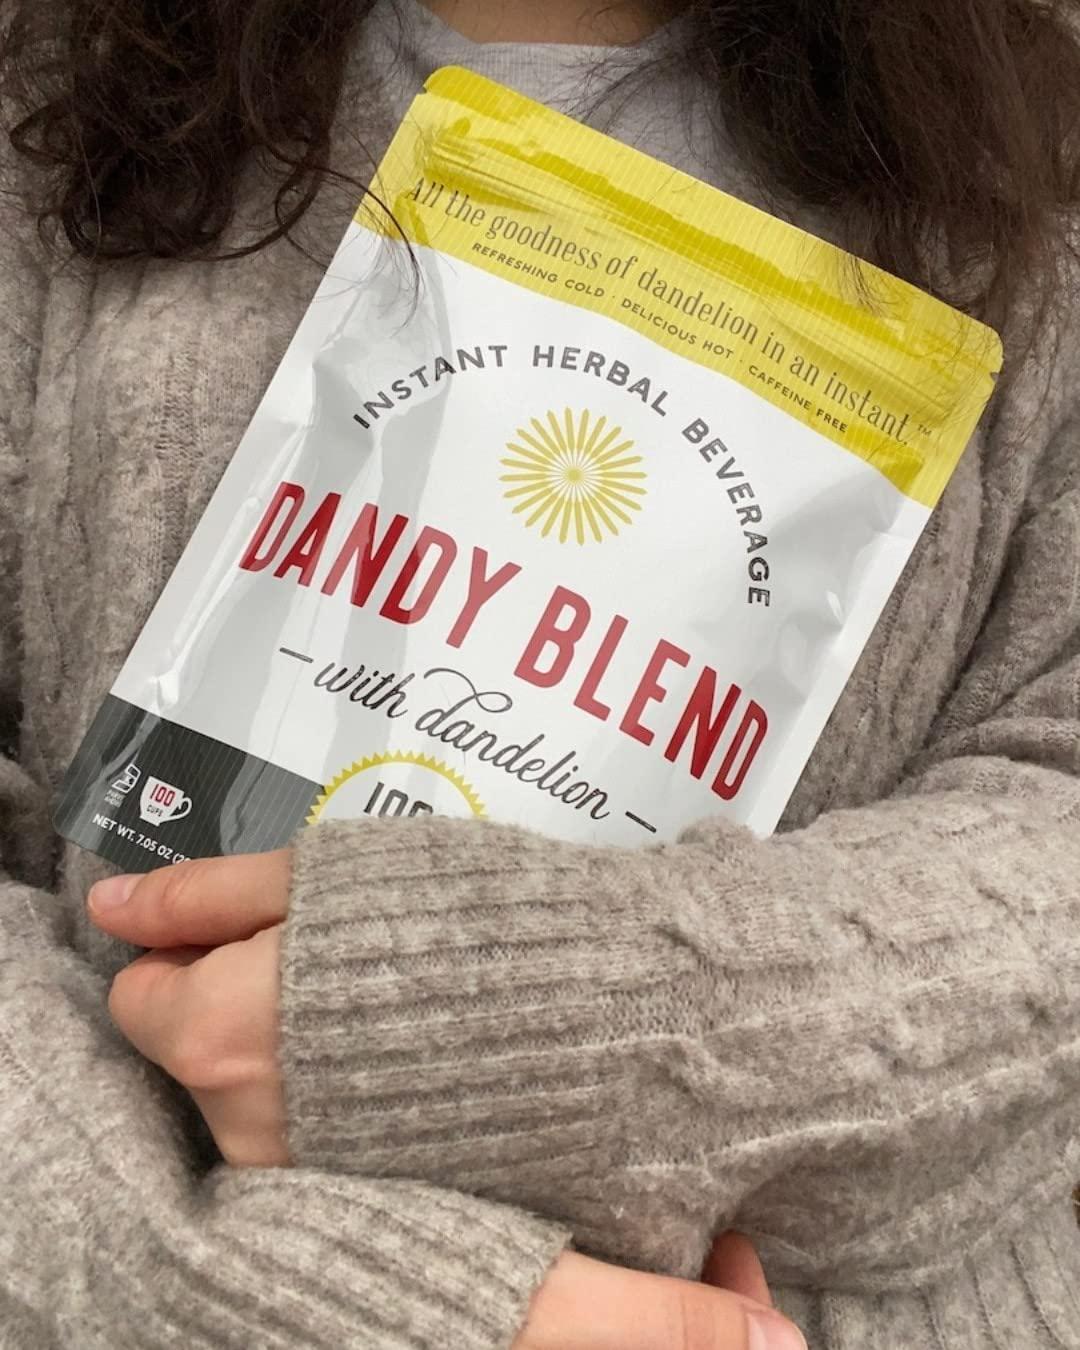 Two bags of Original Dandy Blend Instant Herbal Beverage with Dandelion Two  7.05 oz. bags ( two 200g. bags)